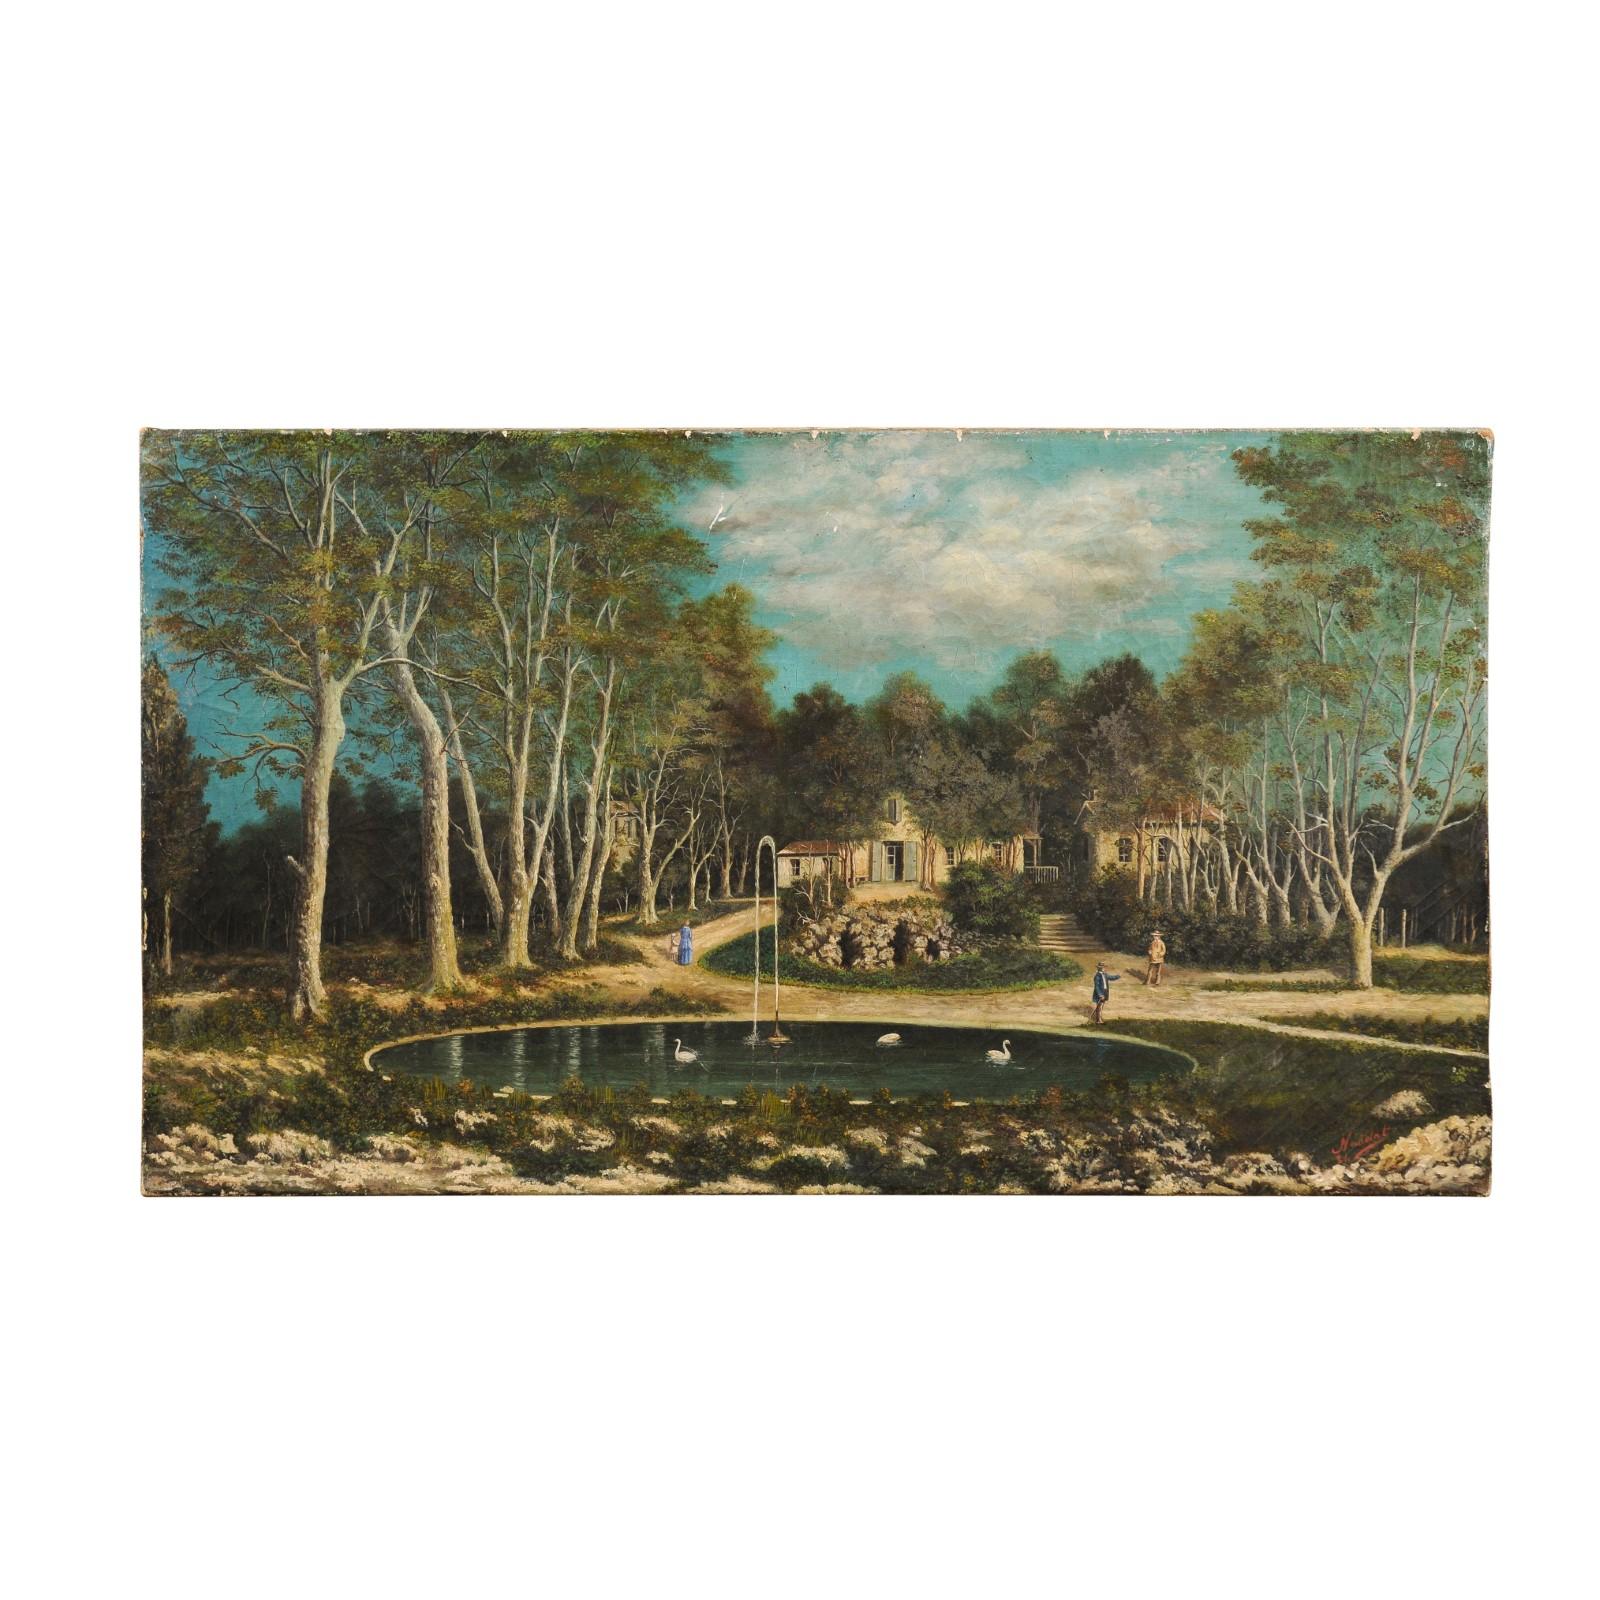 A French oil on canvas landscape painting from the 19th century, depicting an elegant hamlet with fountain in the foreground. Created in France during the 19th century, this painting depicts a serene and peaceful scene. Hidden behind trees, a hamlet